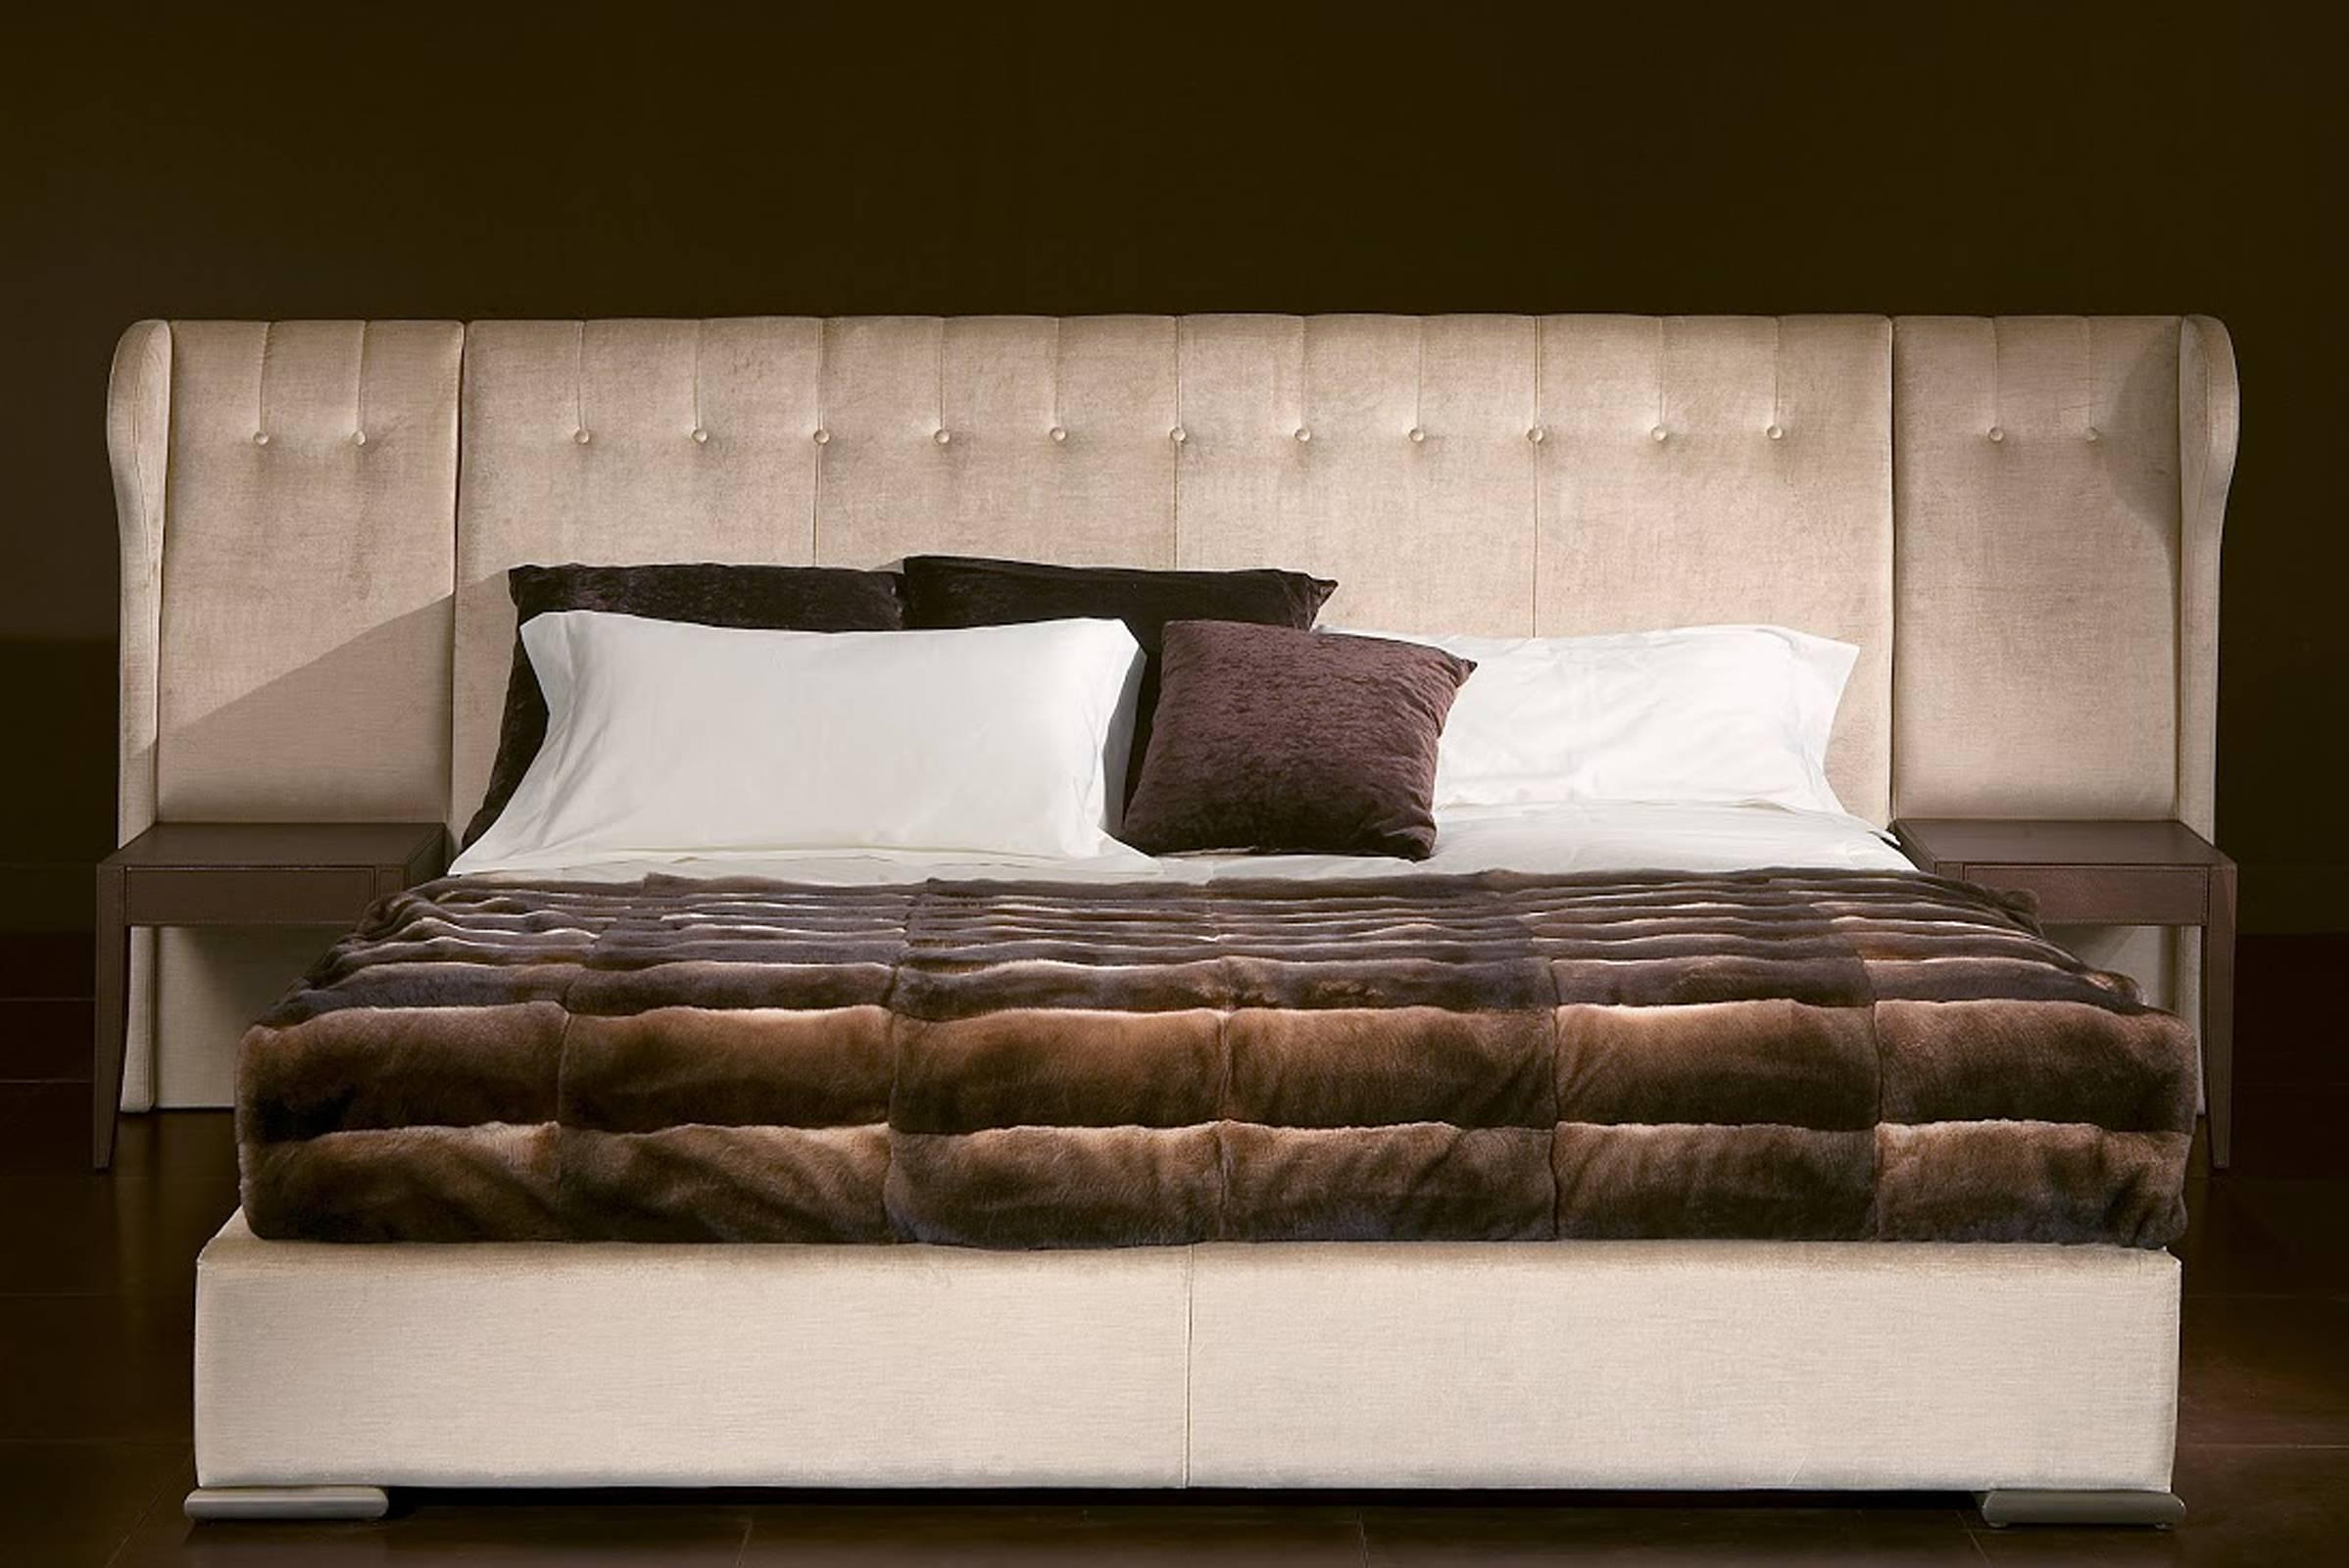 Bed Parma for slat 200cm, box and headboard made 
with fabric category. A night table with leather finishing 
or rosewood.
Available:
For slat 160 and 180cm.
Without night table.
With fabric cat. B; leather cat B - C and D.
